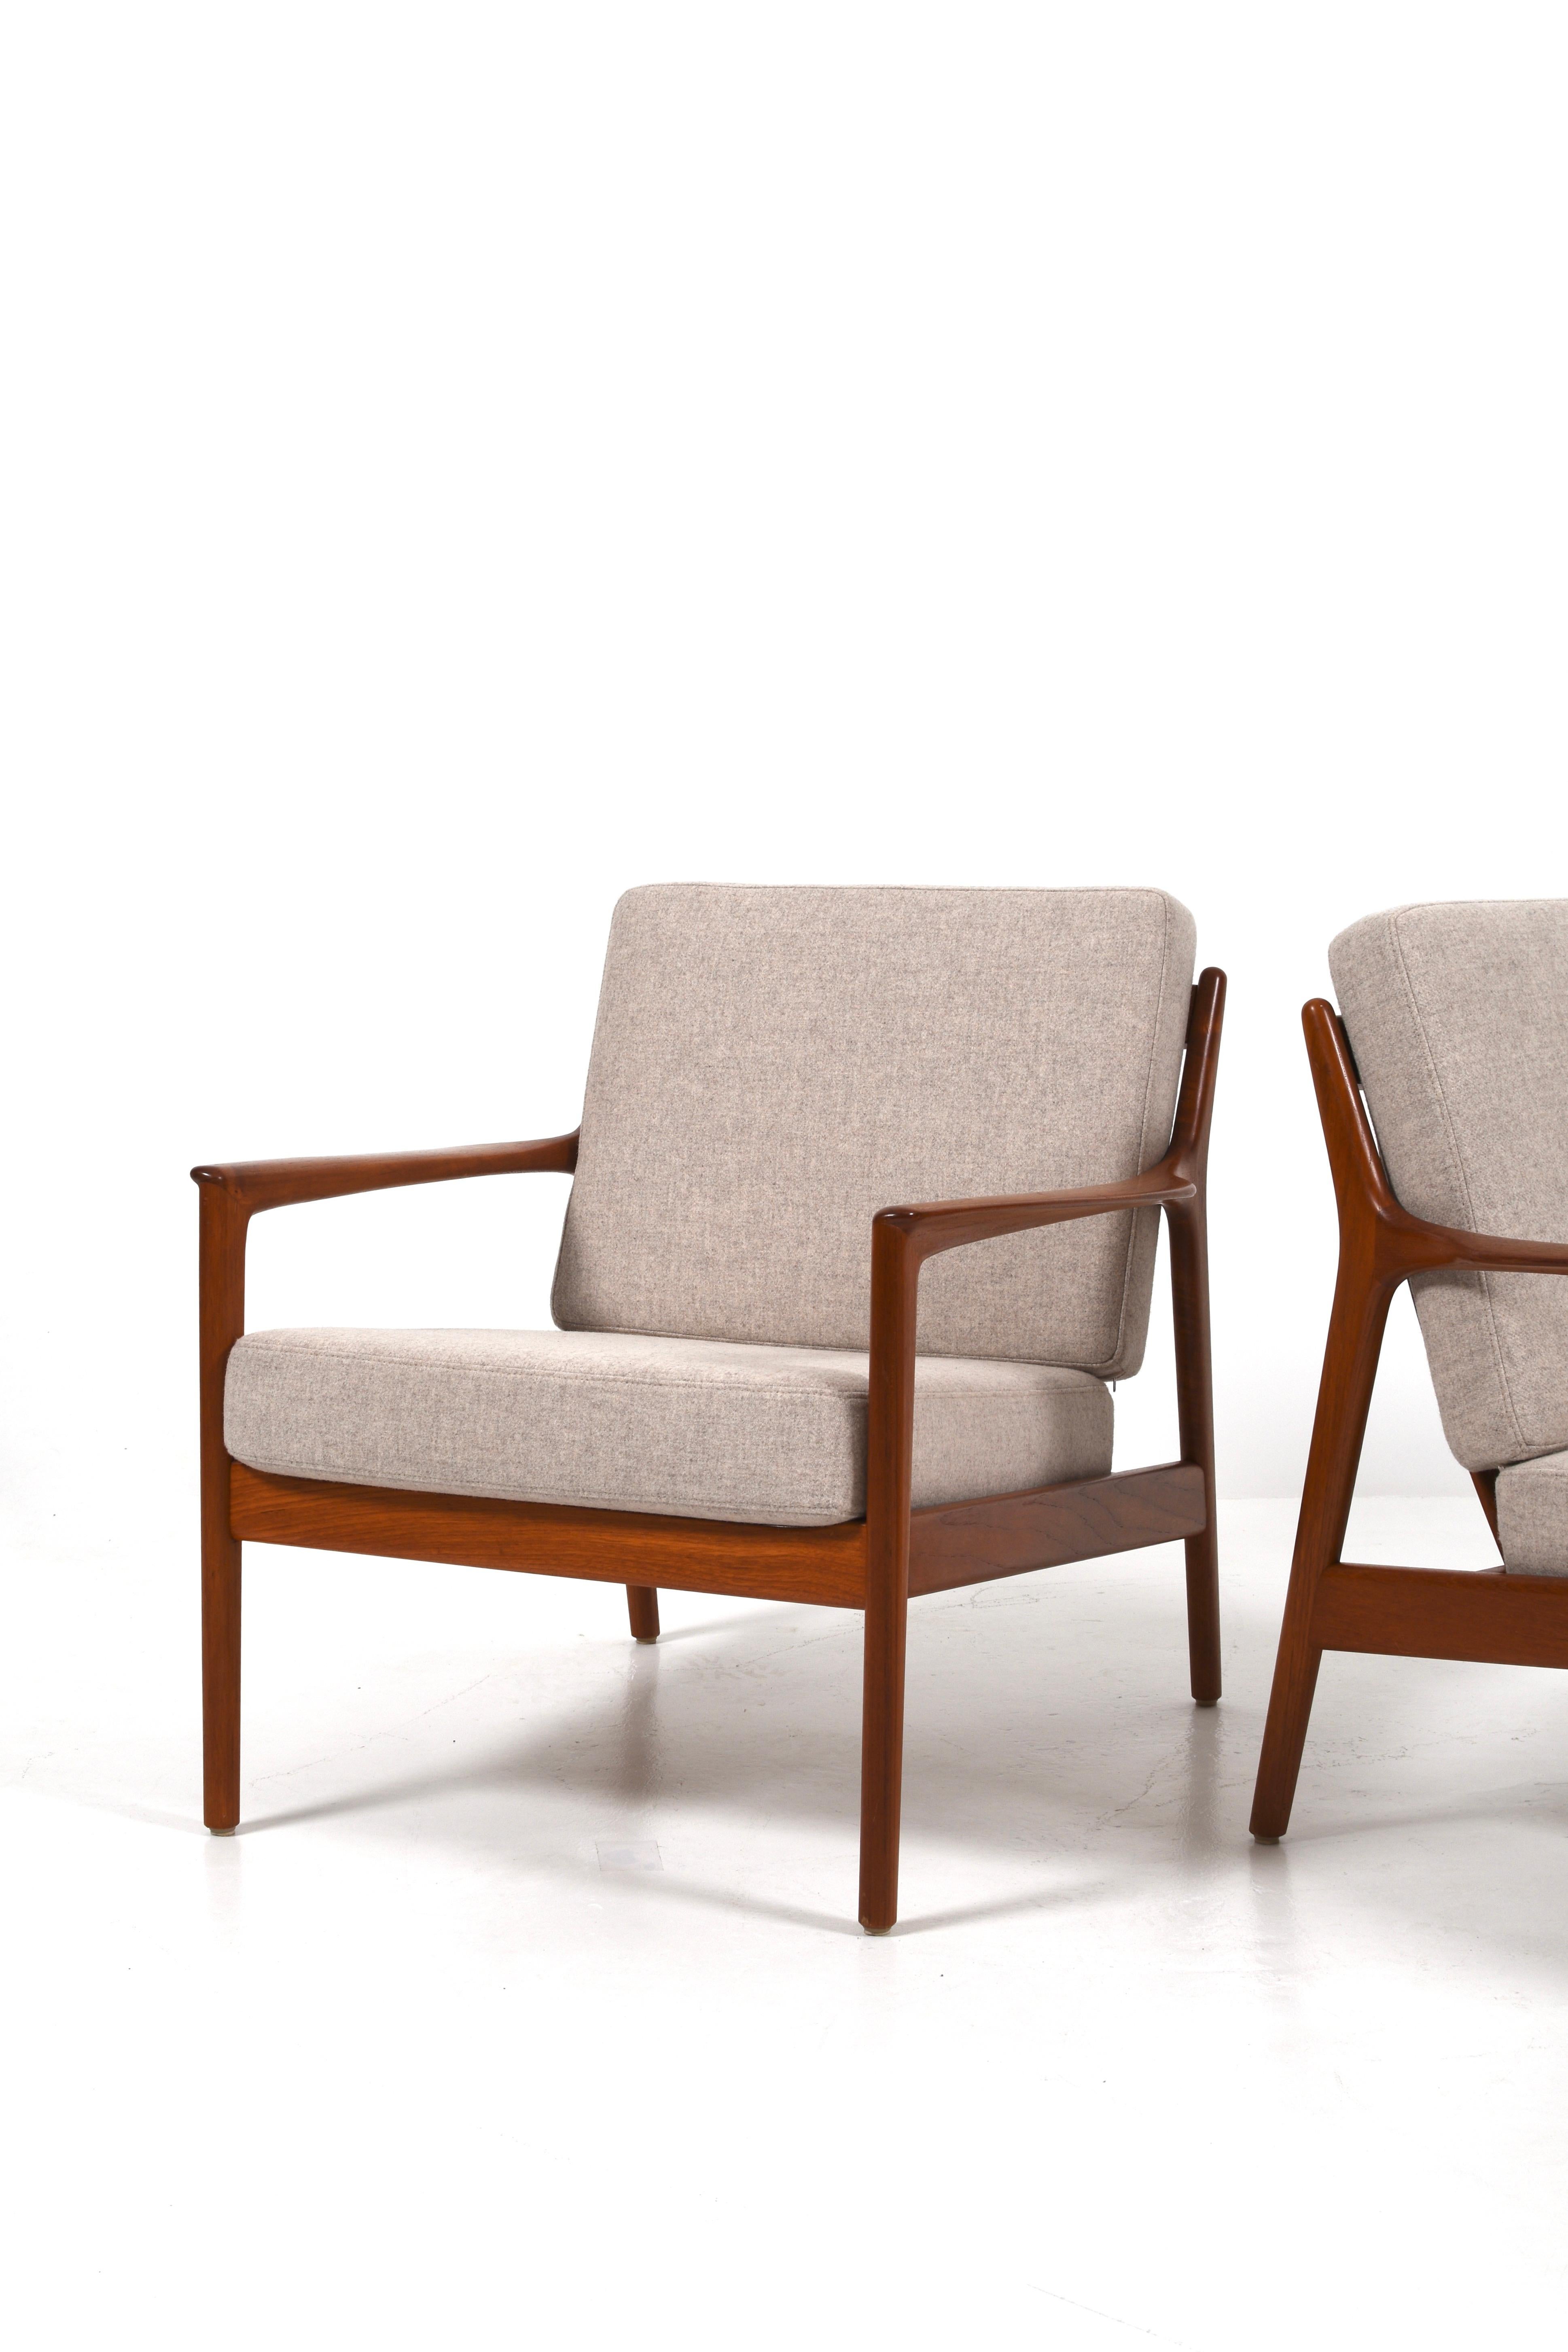 Swedish Pair of “USA 75” Teak Lounge Chairs by Folke Ohlsson for DUX, Sweden, 1960s For Sale